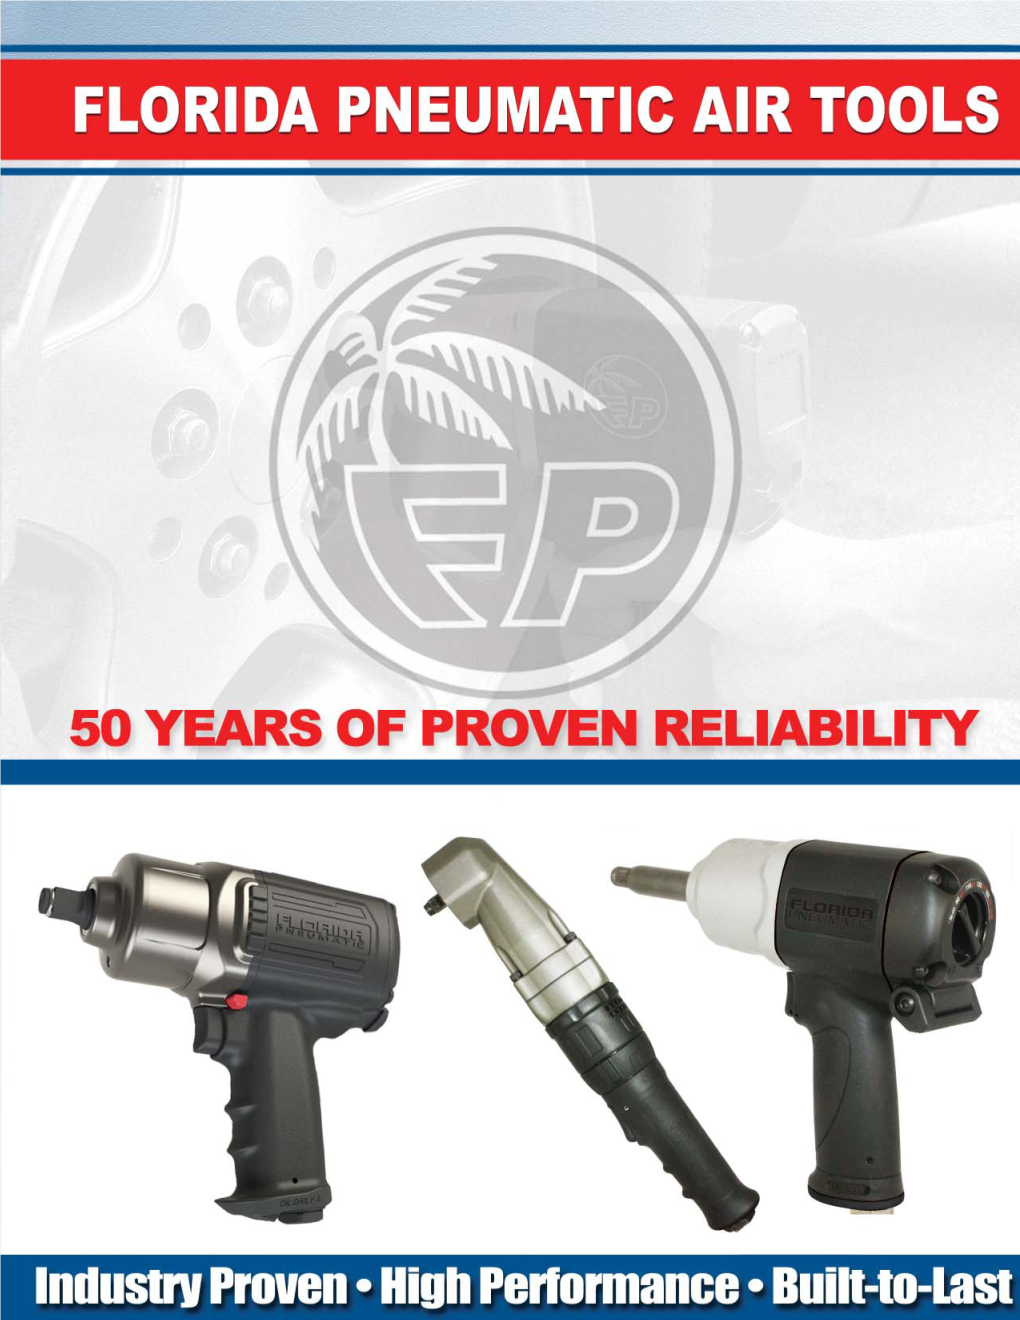 FLORIDA PNEUMATIC AIR TOOLS North American Assembly & Testing, Distribution and Headquarters; and Worldwide Manufacturing Sources